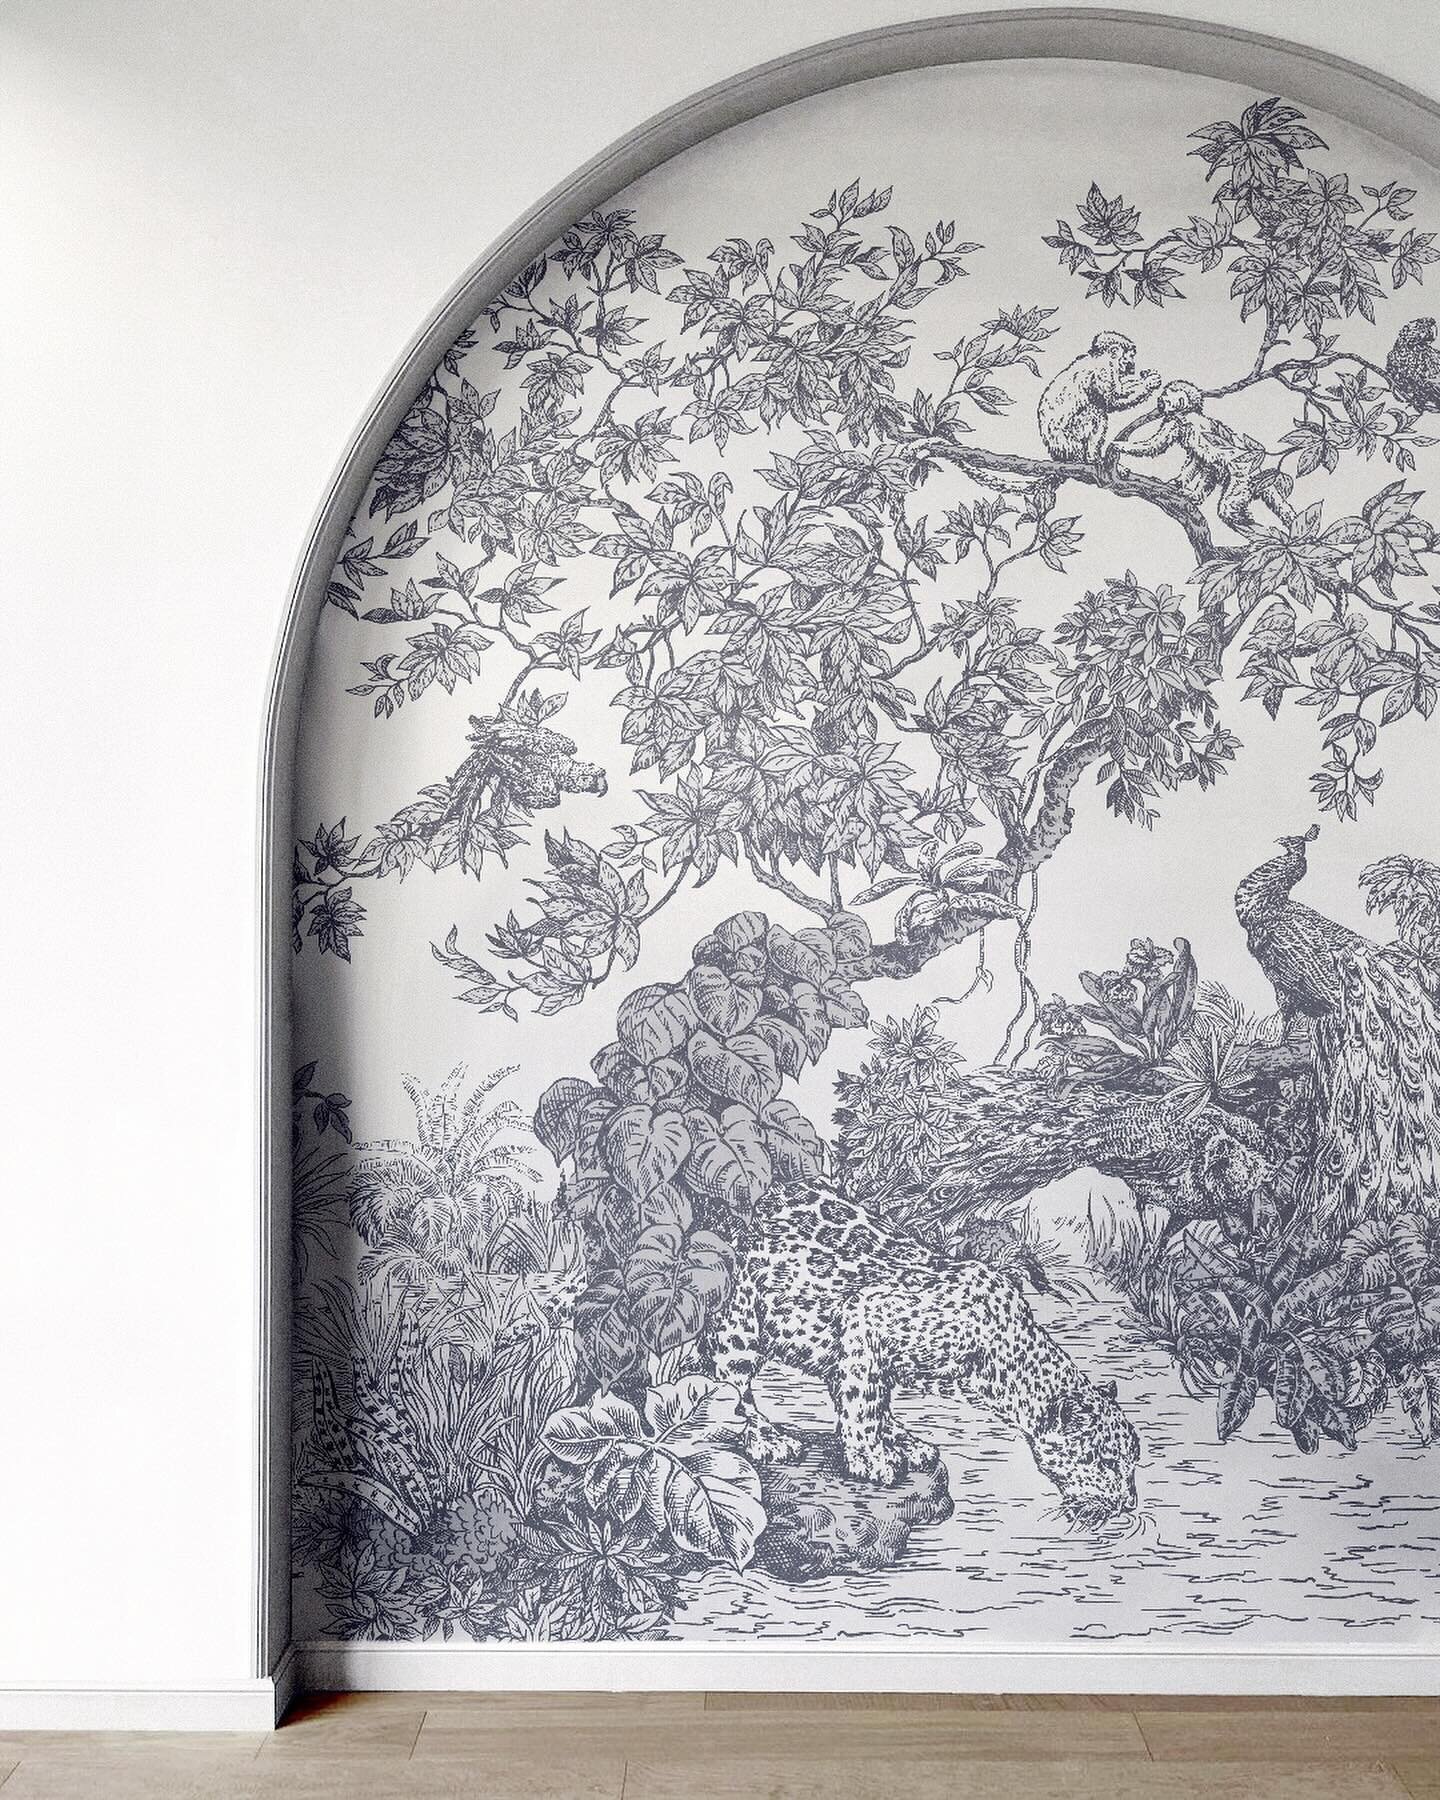 Hey, have you seen the Sinharaja Mural from my Nature's Tapestry collection on @miltonandking?
 It's a hand-sketched design with vintage charm, inspired by Sri Lanka's legendary forest reserve. I personally love the cool gray version, but it's availa